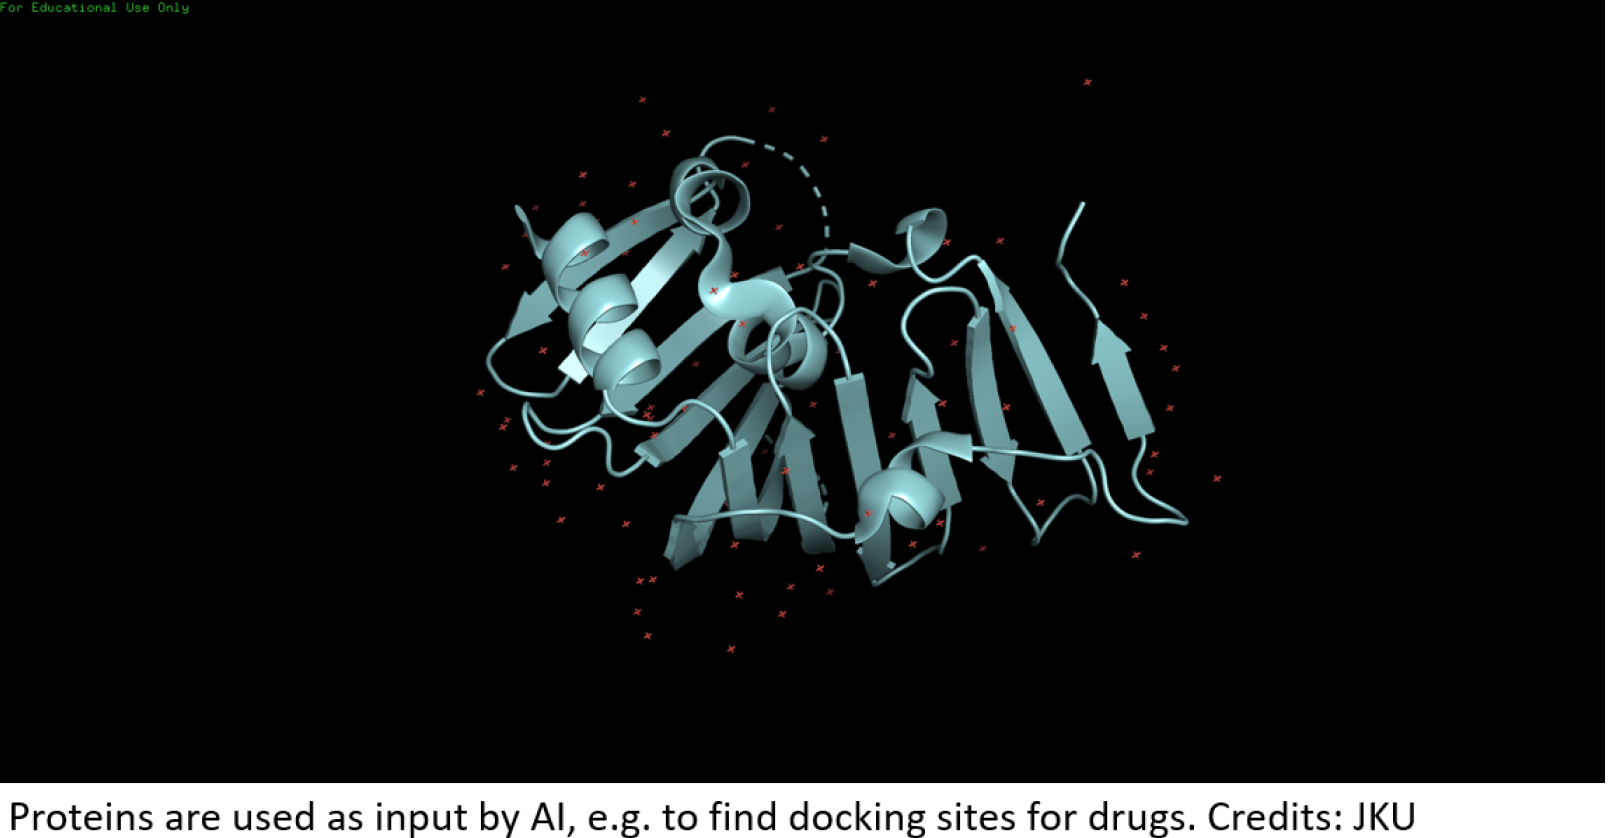 Proteins are used as input by AI e.g to find docking sites for drugs